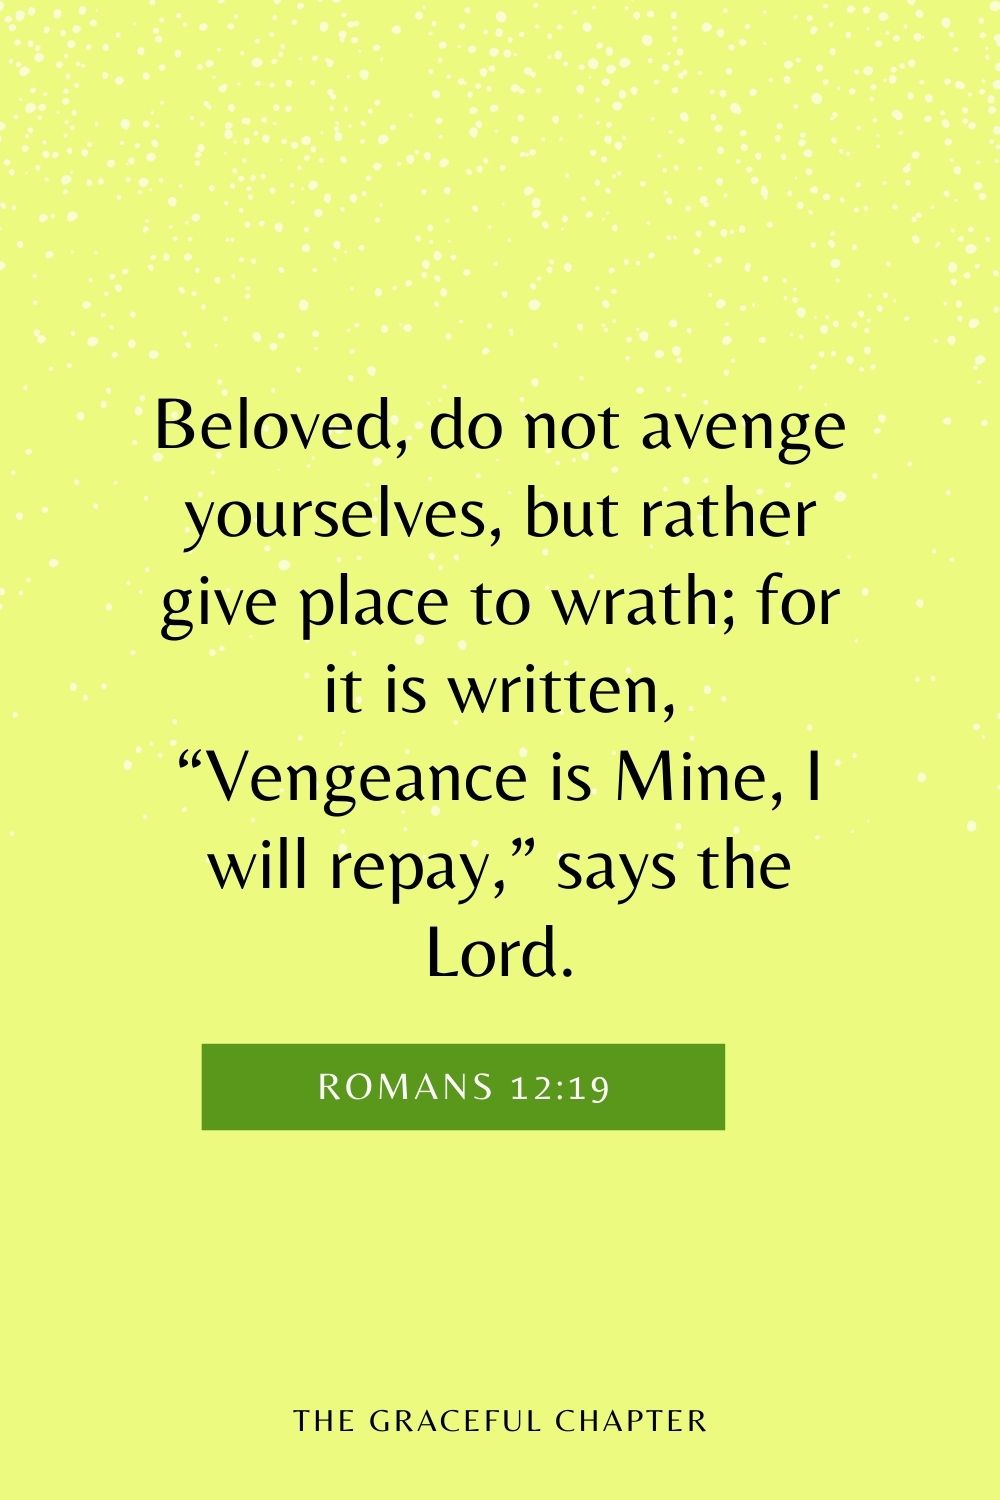 Beloved, do not avenge yourselves, but rather give place to wrath; for it is written, “Vengeance is Mine, I will repay,” says the Lord. Romans 12:19